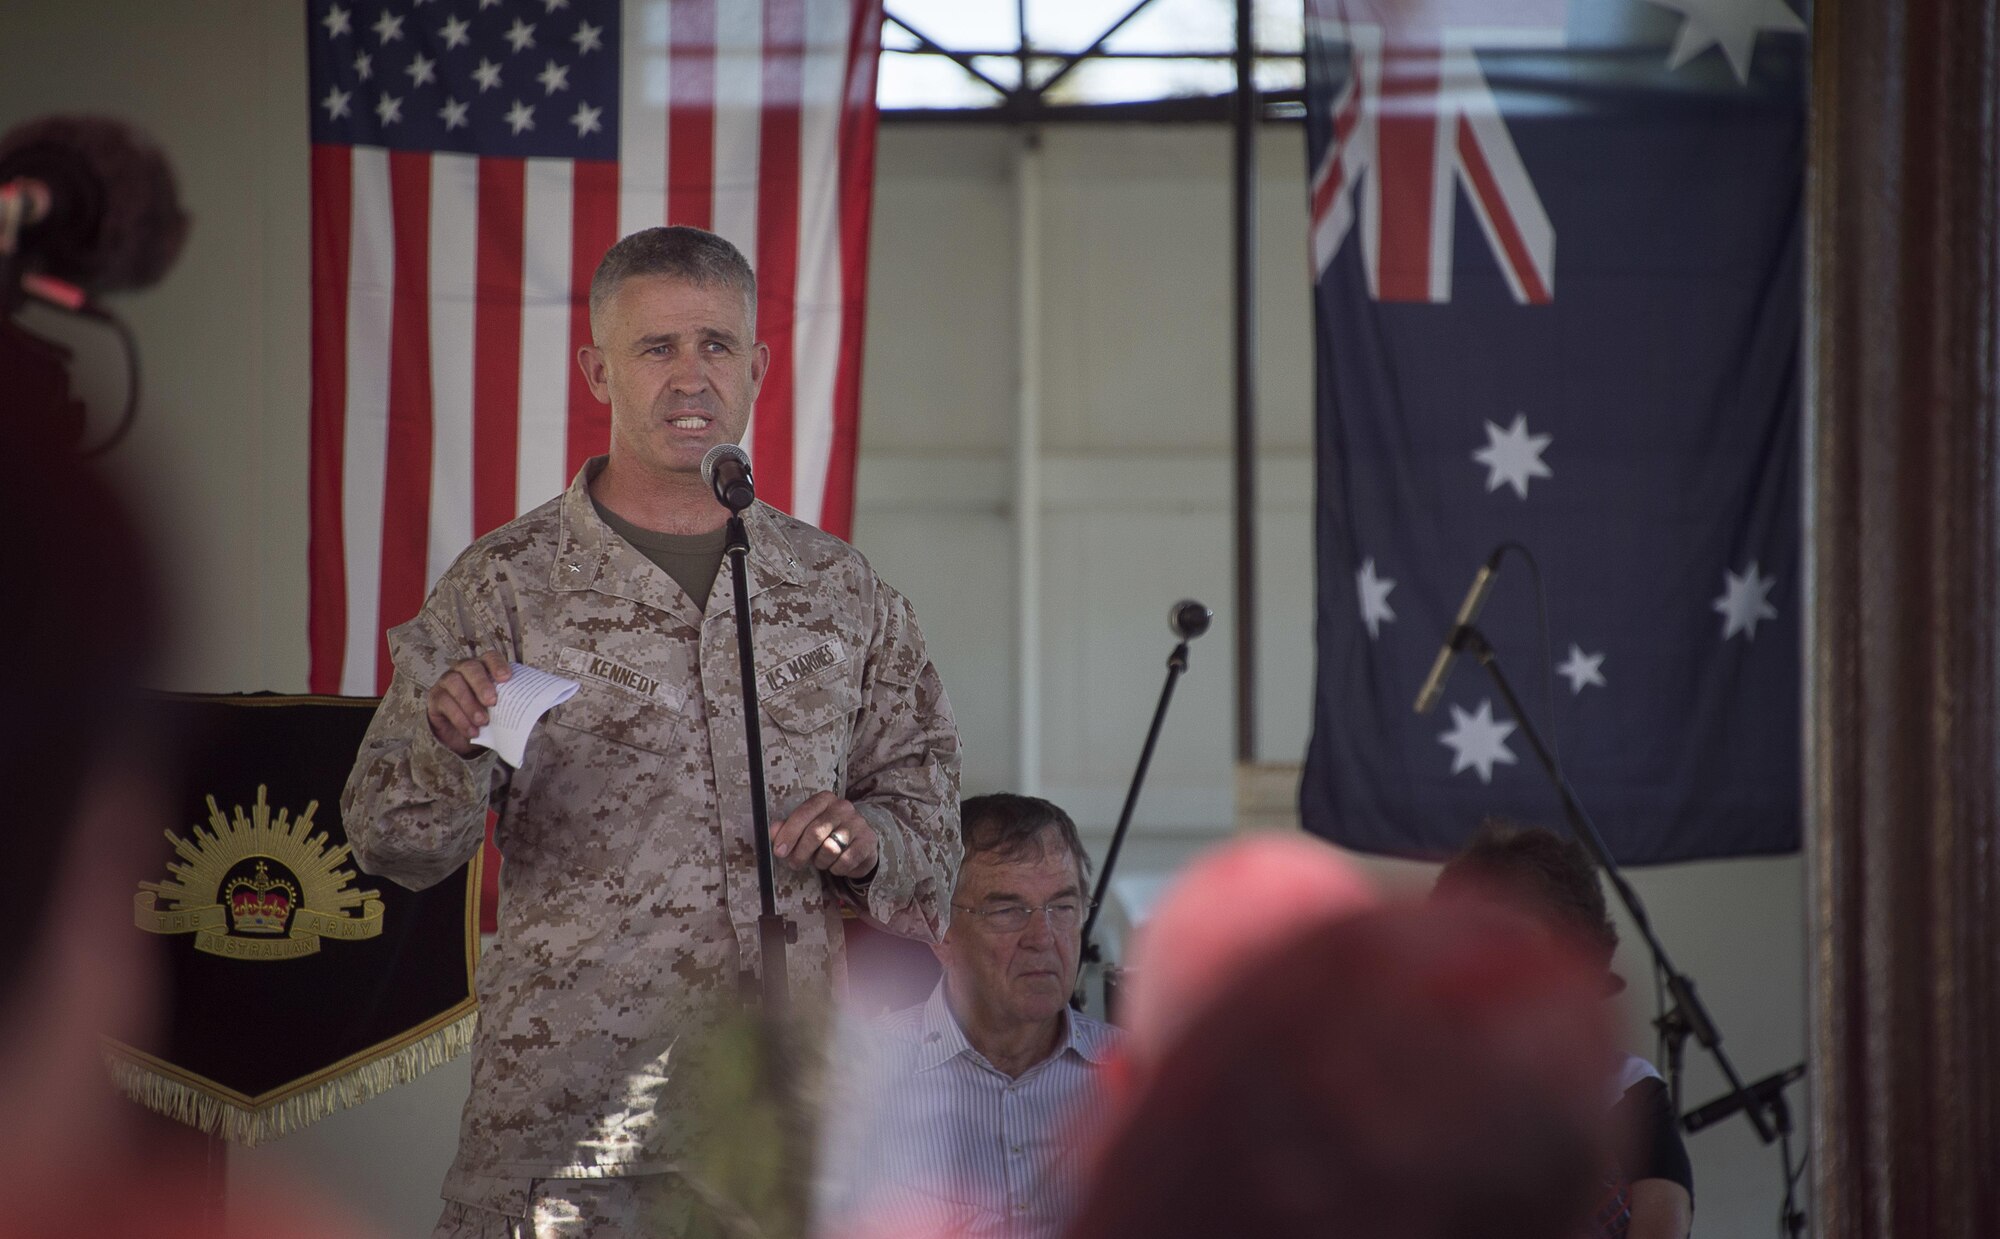 U.S. Marine Corps Brig. Gen. Paul Kennedy, 3rd Marine Expeditionary Brigade commanding general, makes an opening statement during Talisman Sabre 2015 opening day at the Darwin Showground, July 5, 2015. Talisman Sabre is a biennial exercise that provides an invaluable opportunity for approximately 30,000 U.S. and Australian service members to conduct operations in a combined, joint and interagency environment that will increase both countries’ ability to plan and execute contingency responses, from combat missions to humanitarian assistance efforts. (U.S. Navy photo by Mass Communication Specialist 2nd Class Daniel M. Young/Released)